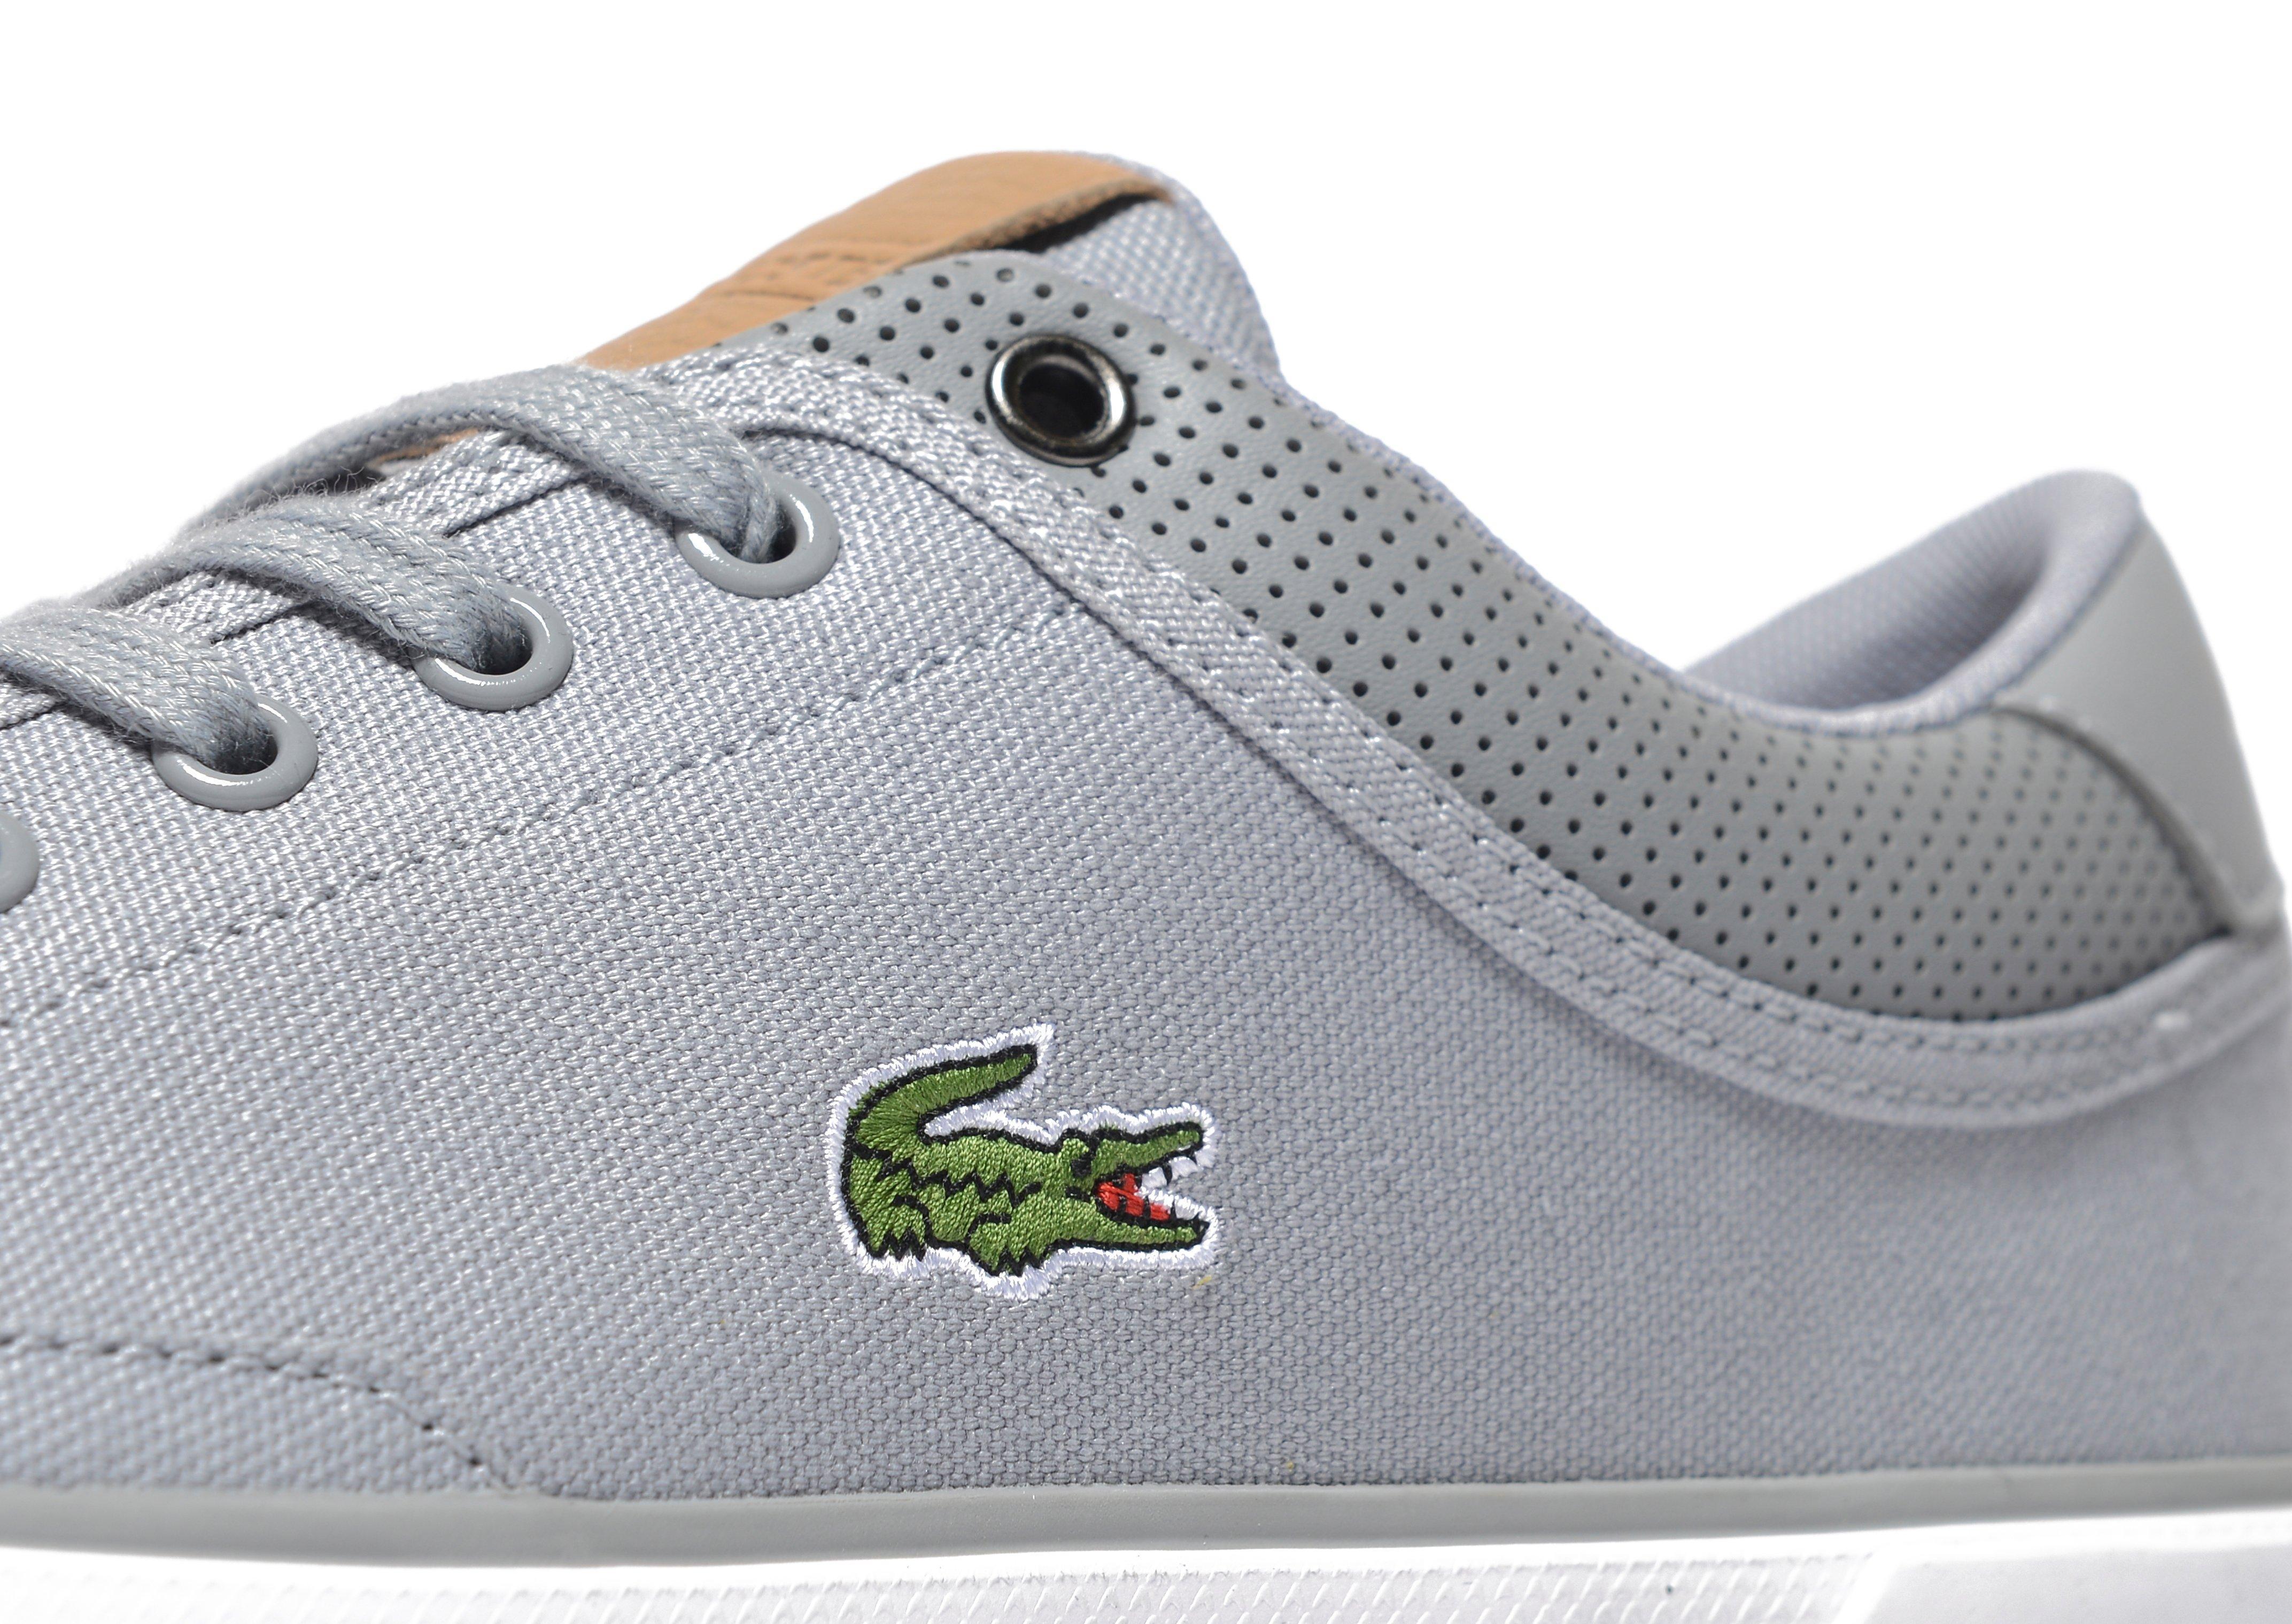 Lacoste Leather Angha 217 in Grey/Tan 